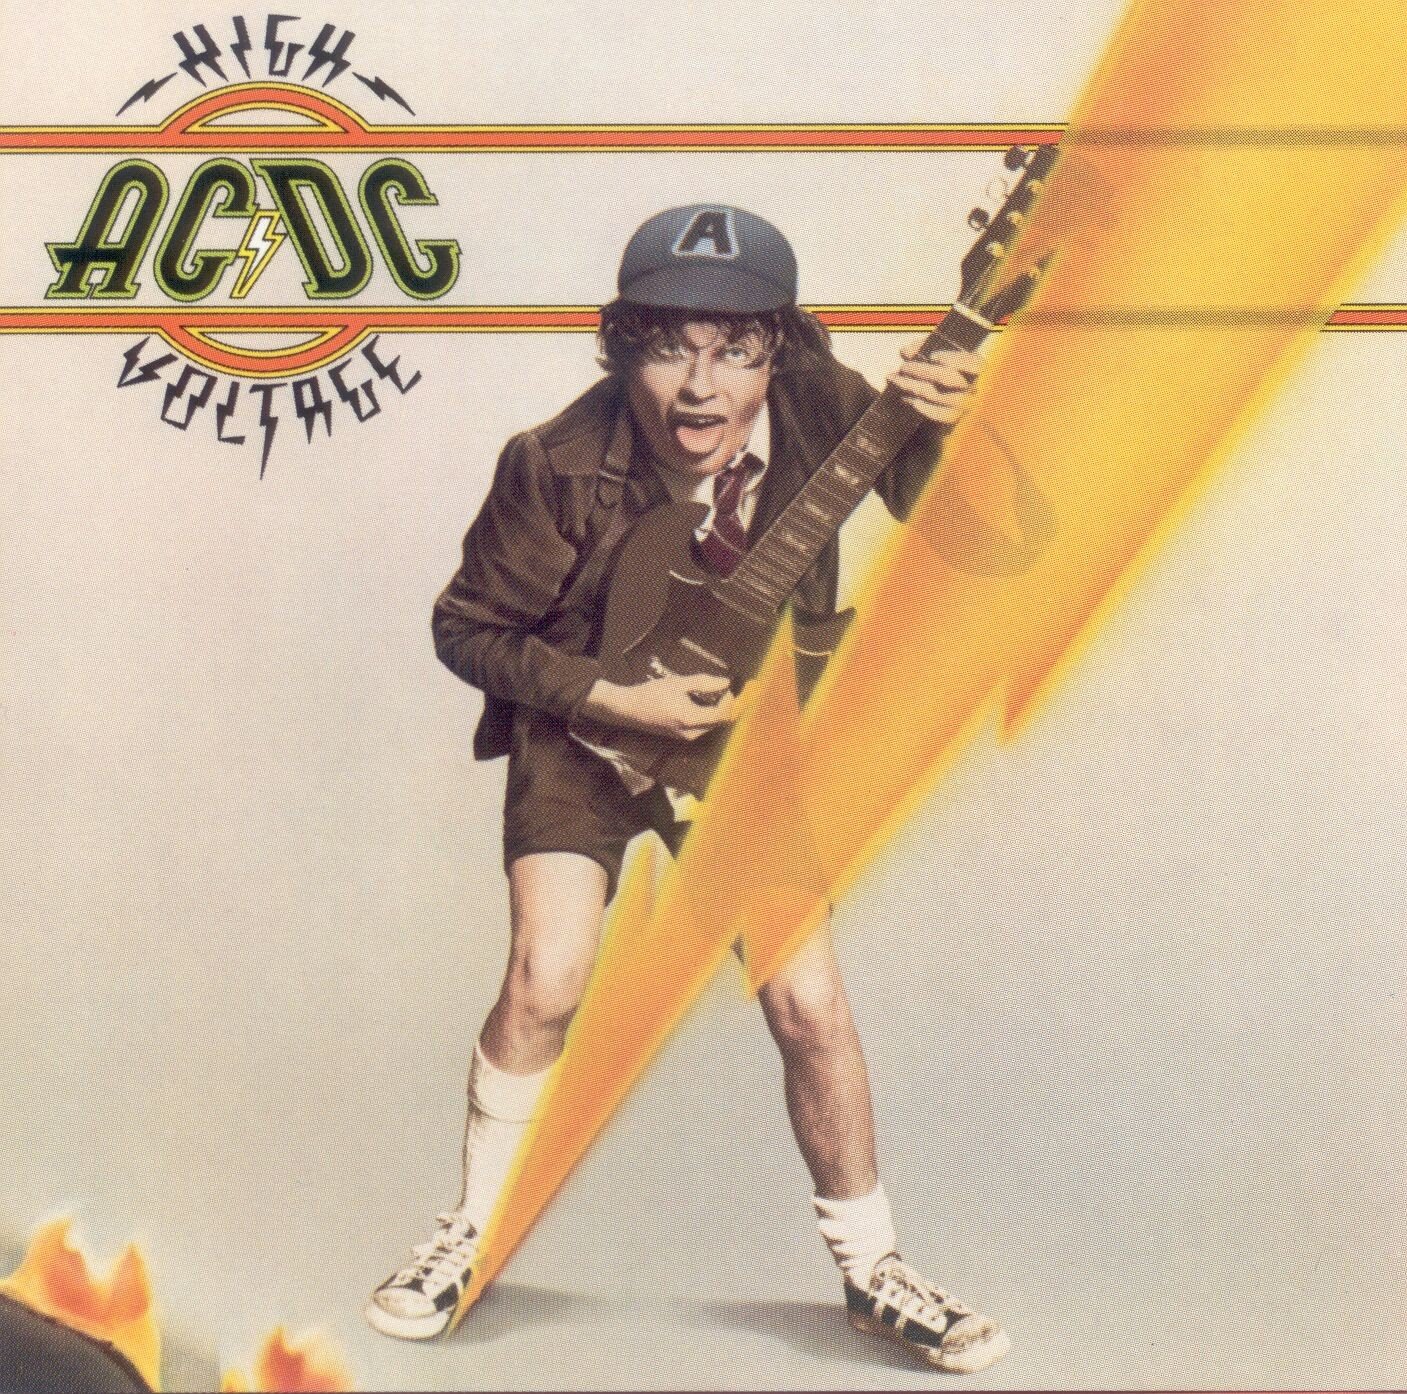 [[AllCDCovers]_acdc_high_voltage_1976_retail_cd-front.jpg]